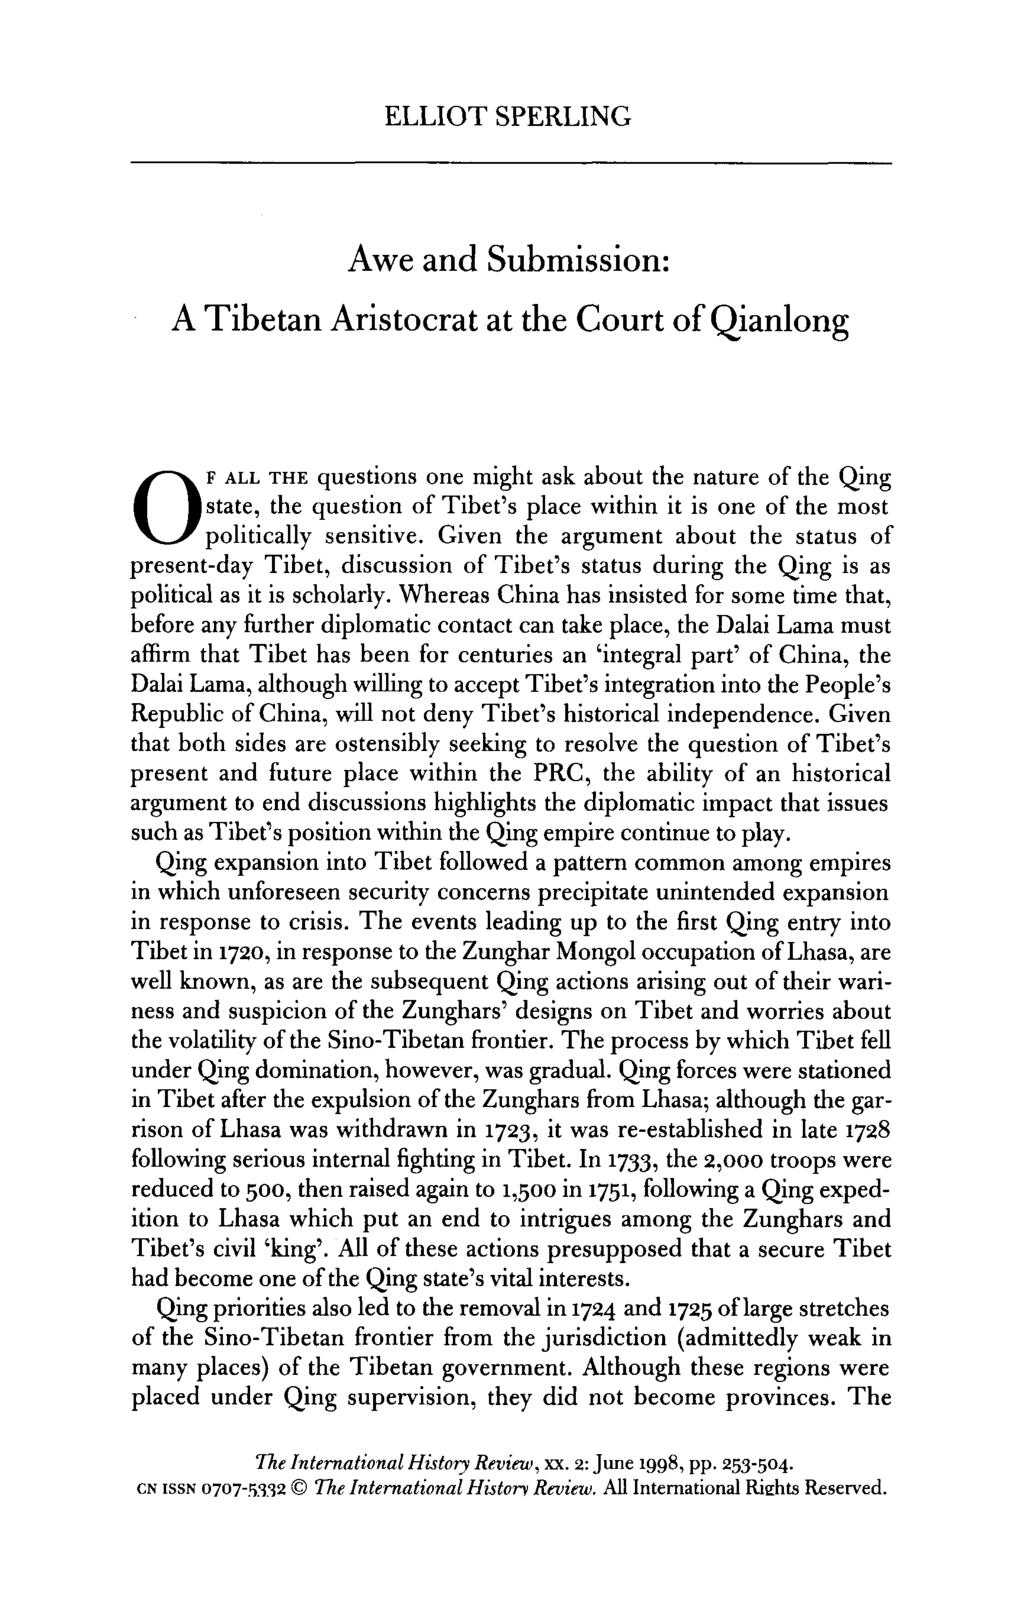 ELLIOT SPERLING Awe and Submission: A Tibetan Aristocrat at the Court of Qianlong OF ALL THE questions one might ask about the nature of the Qing state, the question of Tibet's place within it is one